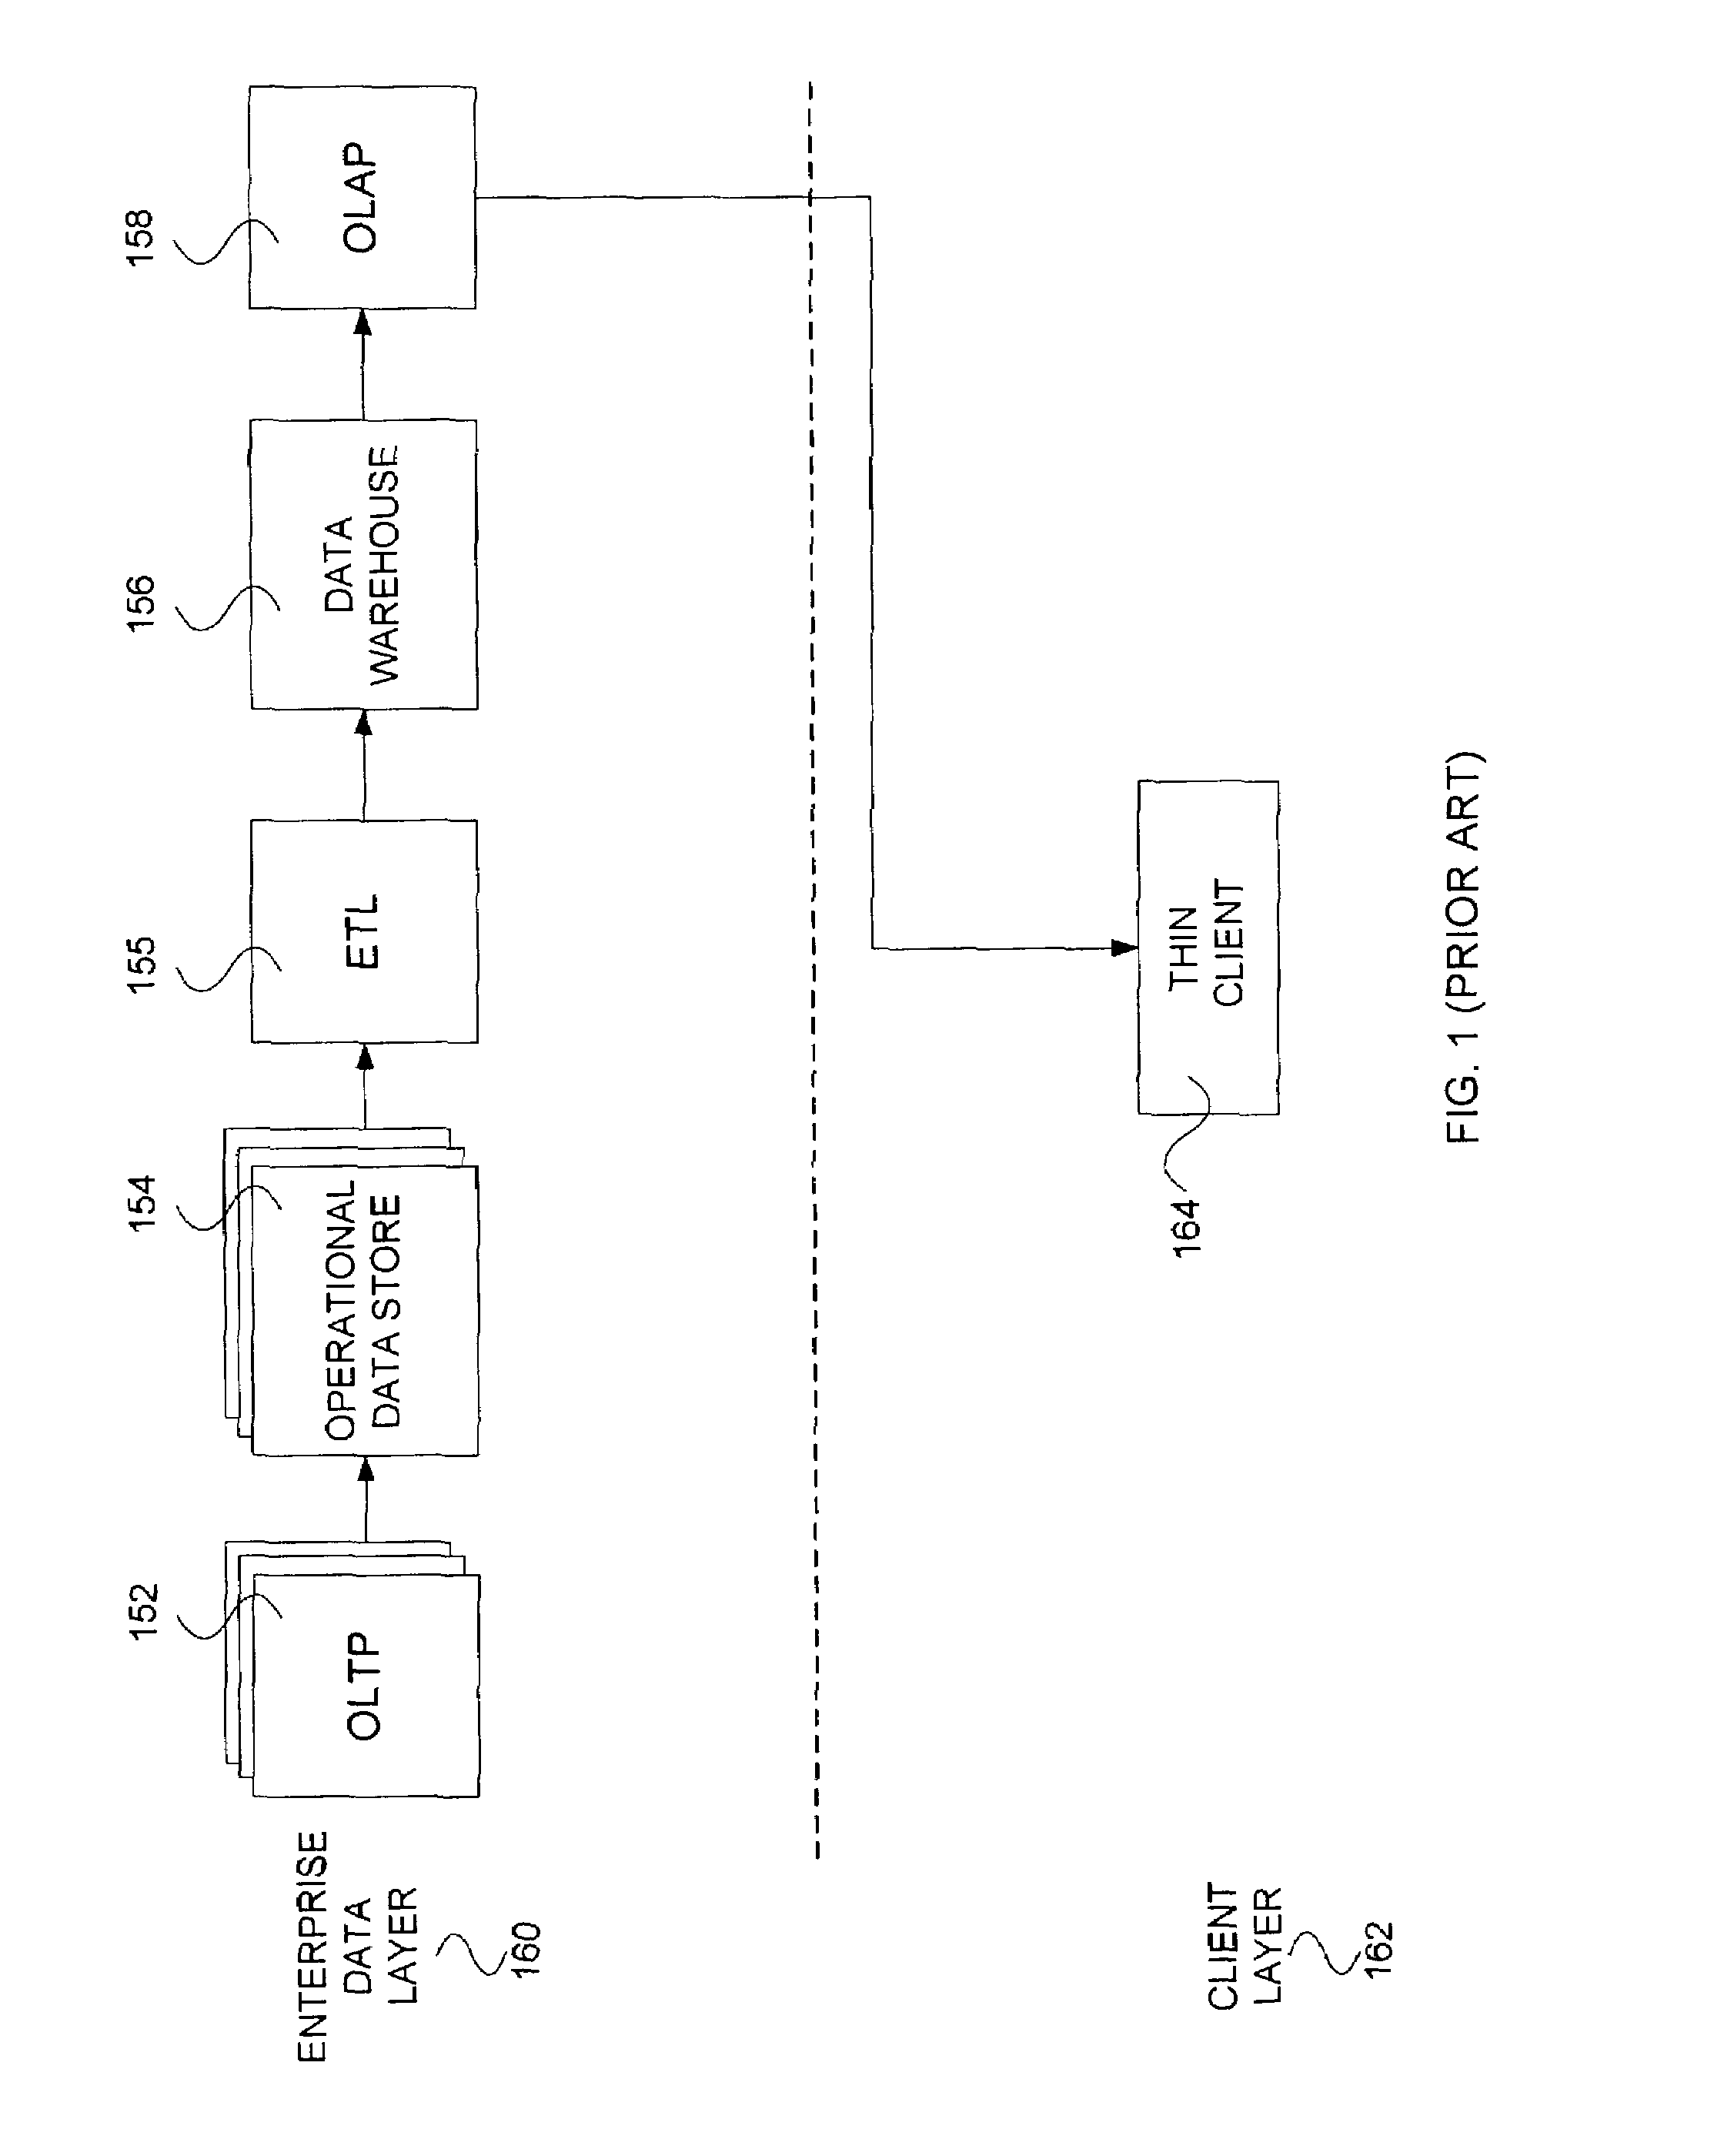 Architecture for general purpose near real-time business intelligence system with client devices and methods therefor